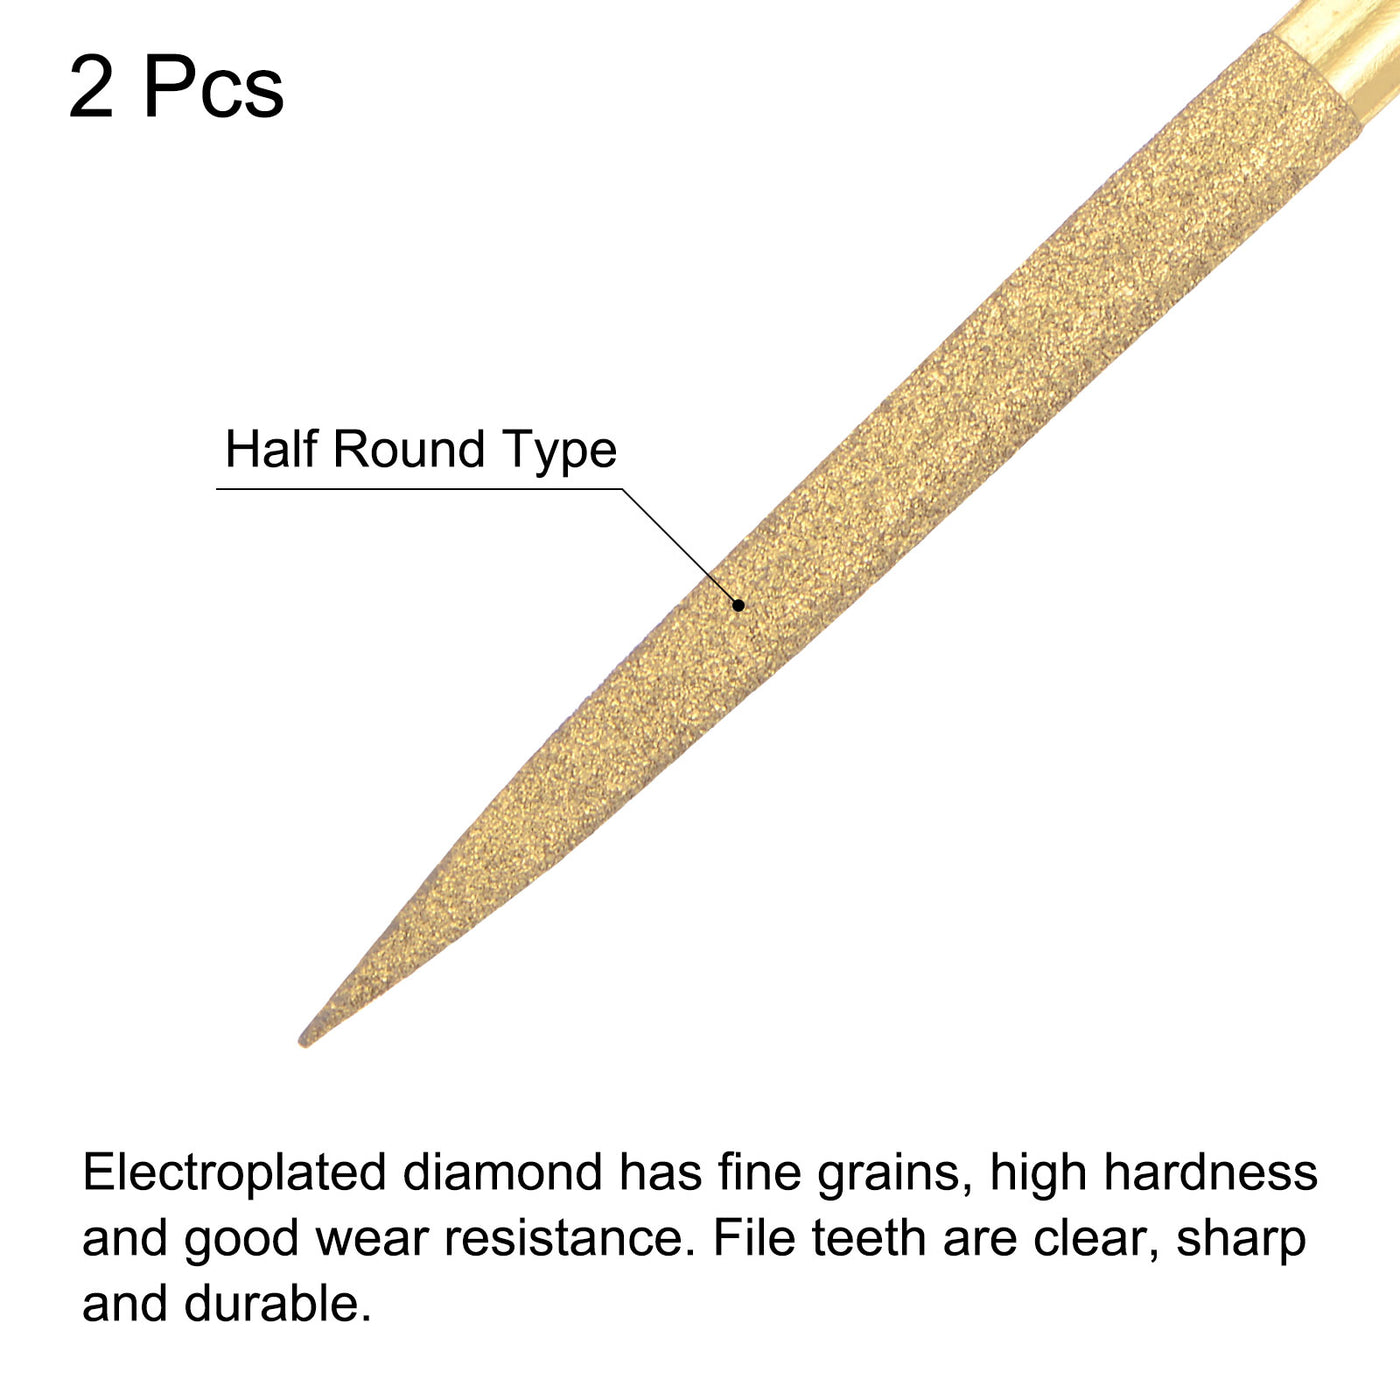 Uxcell Uxcell 5mm x 180mm Titanium Coated Half Round Diamond Needle Files with TPU Handle 2pcs